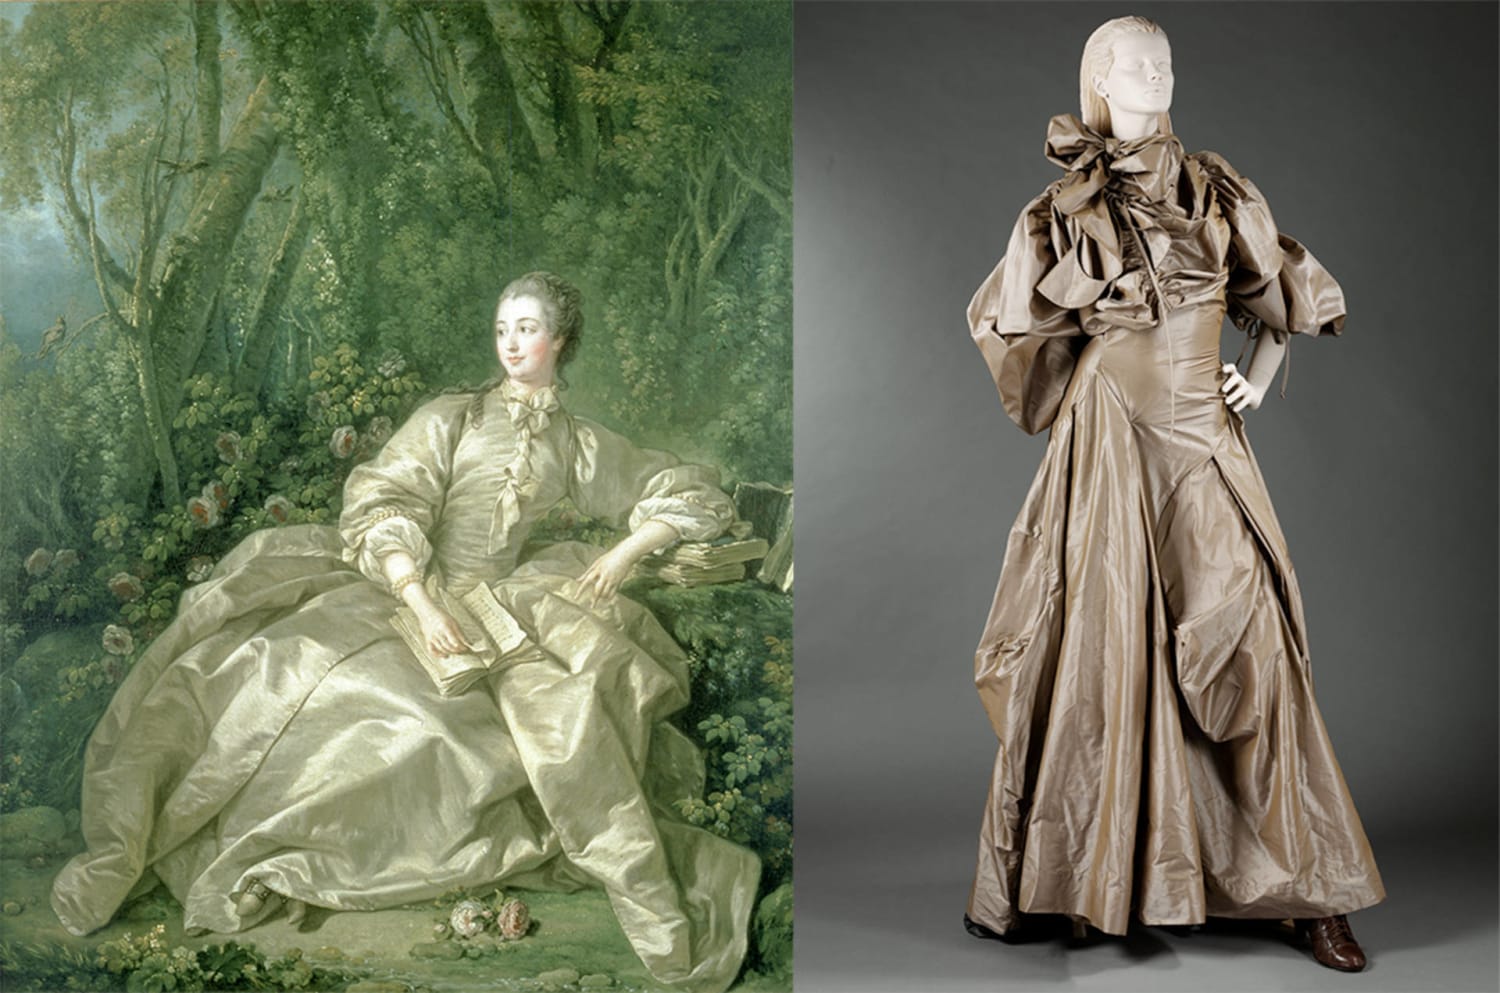 Vivienne Westwood is known for parodying historical looks, like this revamp of Madame de Pompadour's crumpled-silk dress in François Boucher's painting. This asymmetric garment is from her 2003 Anglophilia collection: